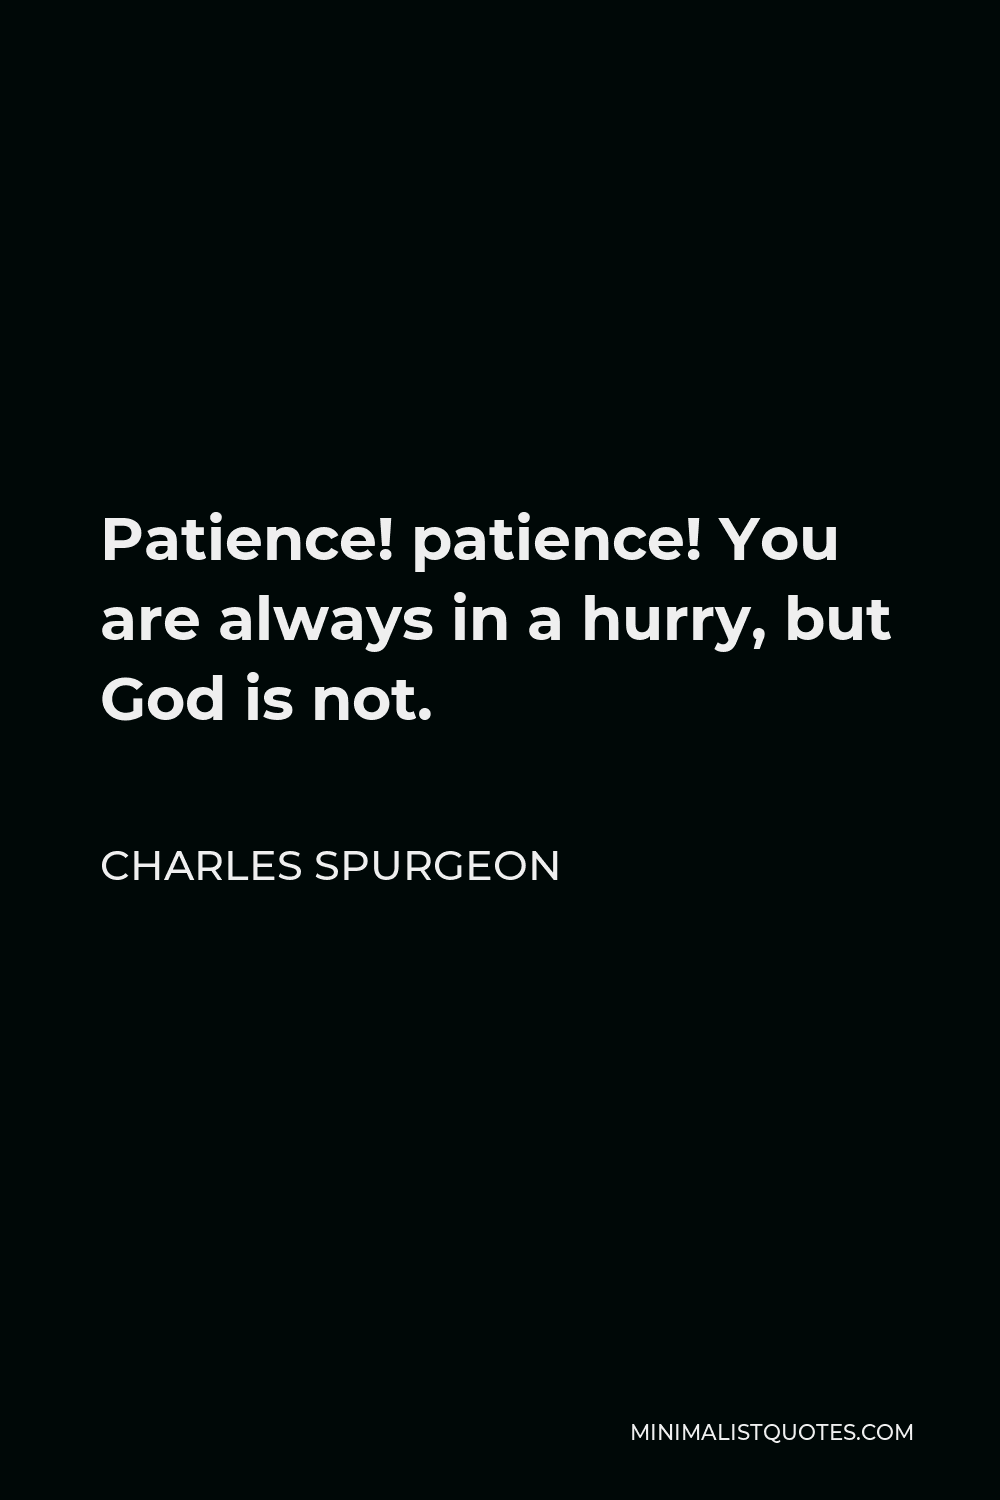 Charles Spurgeon Quote - Patience! patience! You are always in a hurry, but God is not.